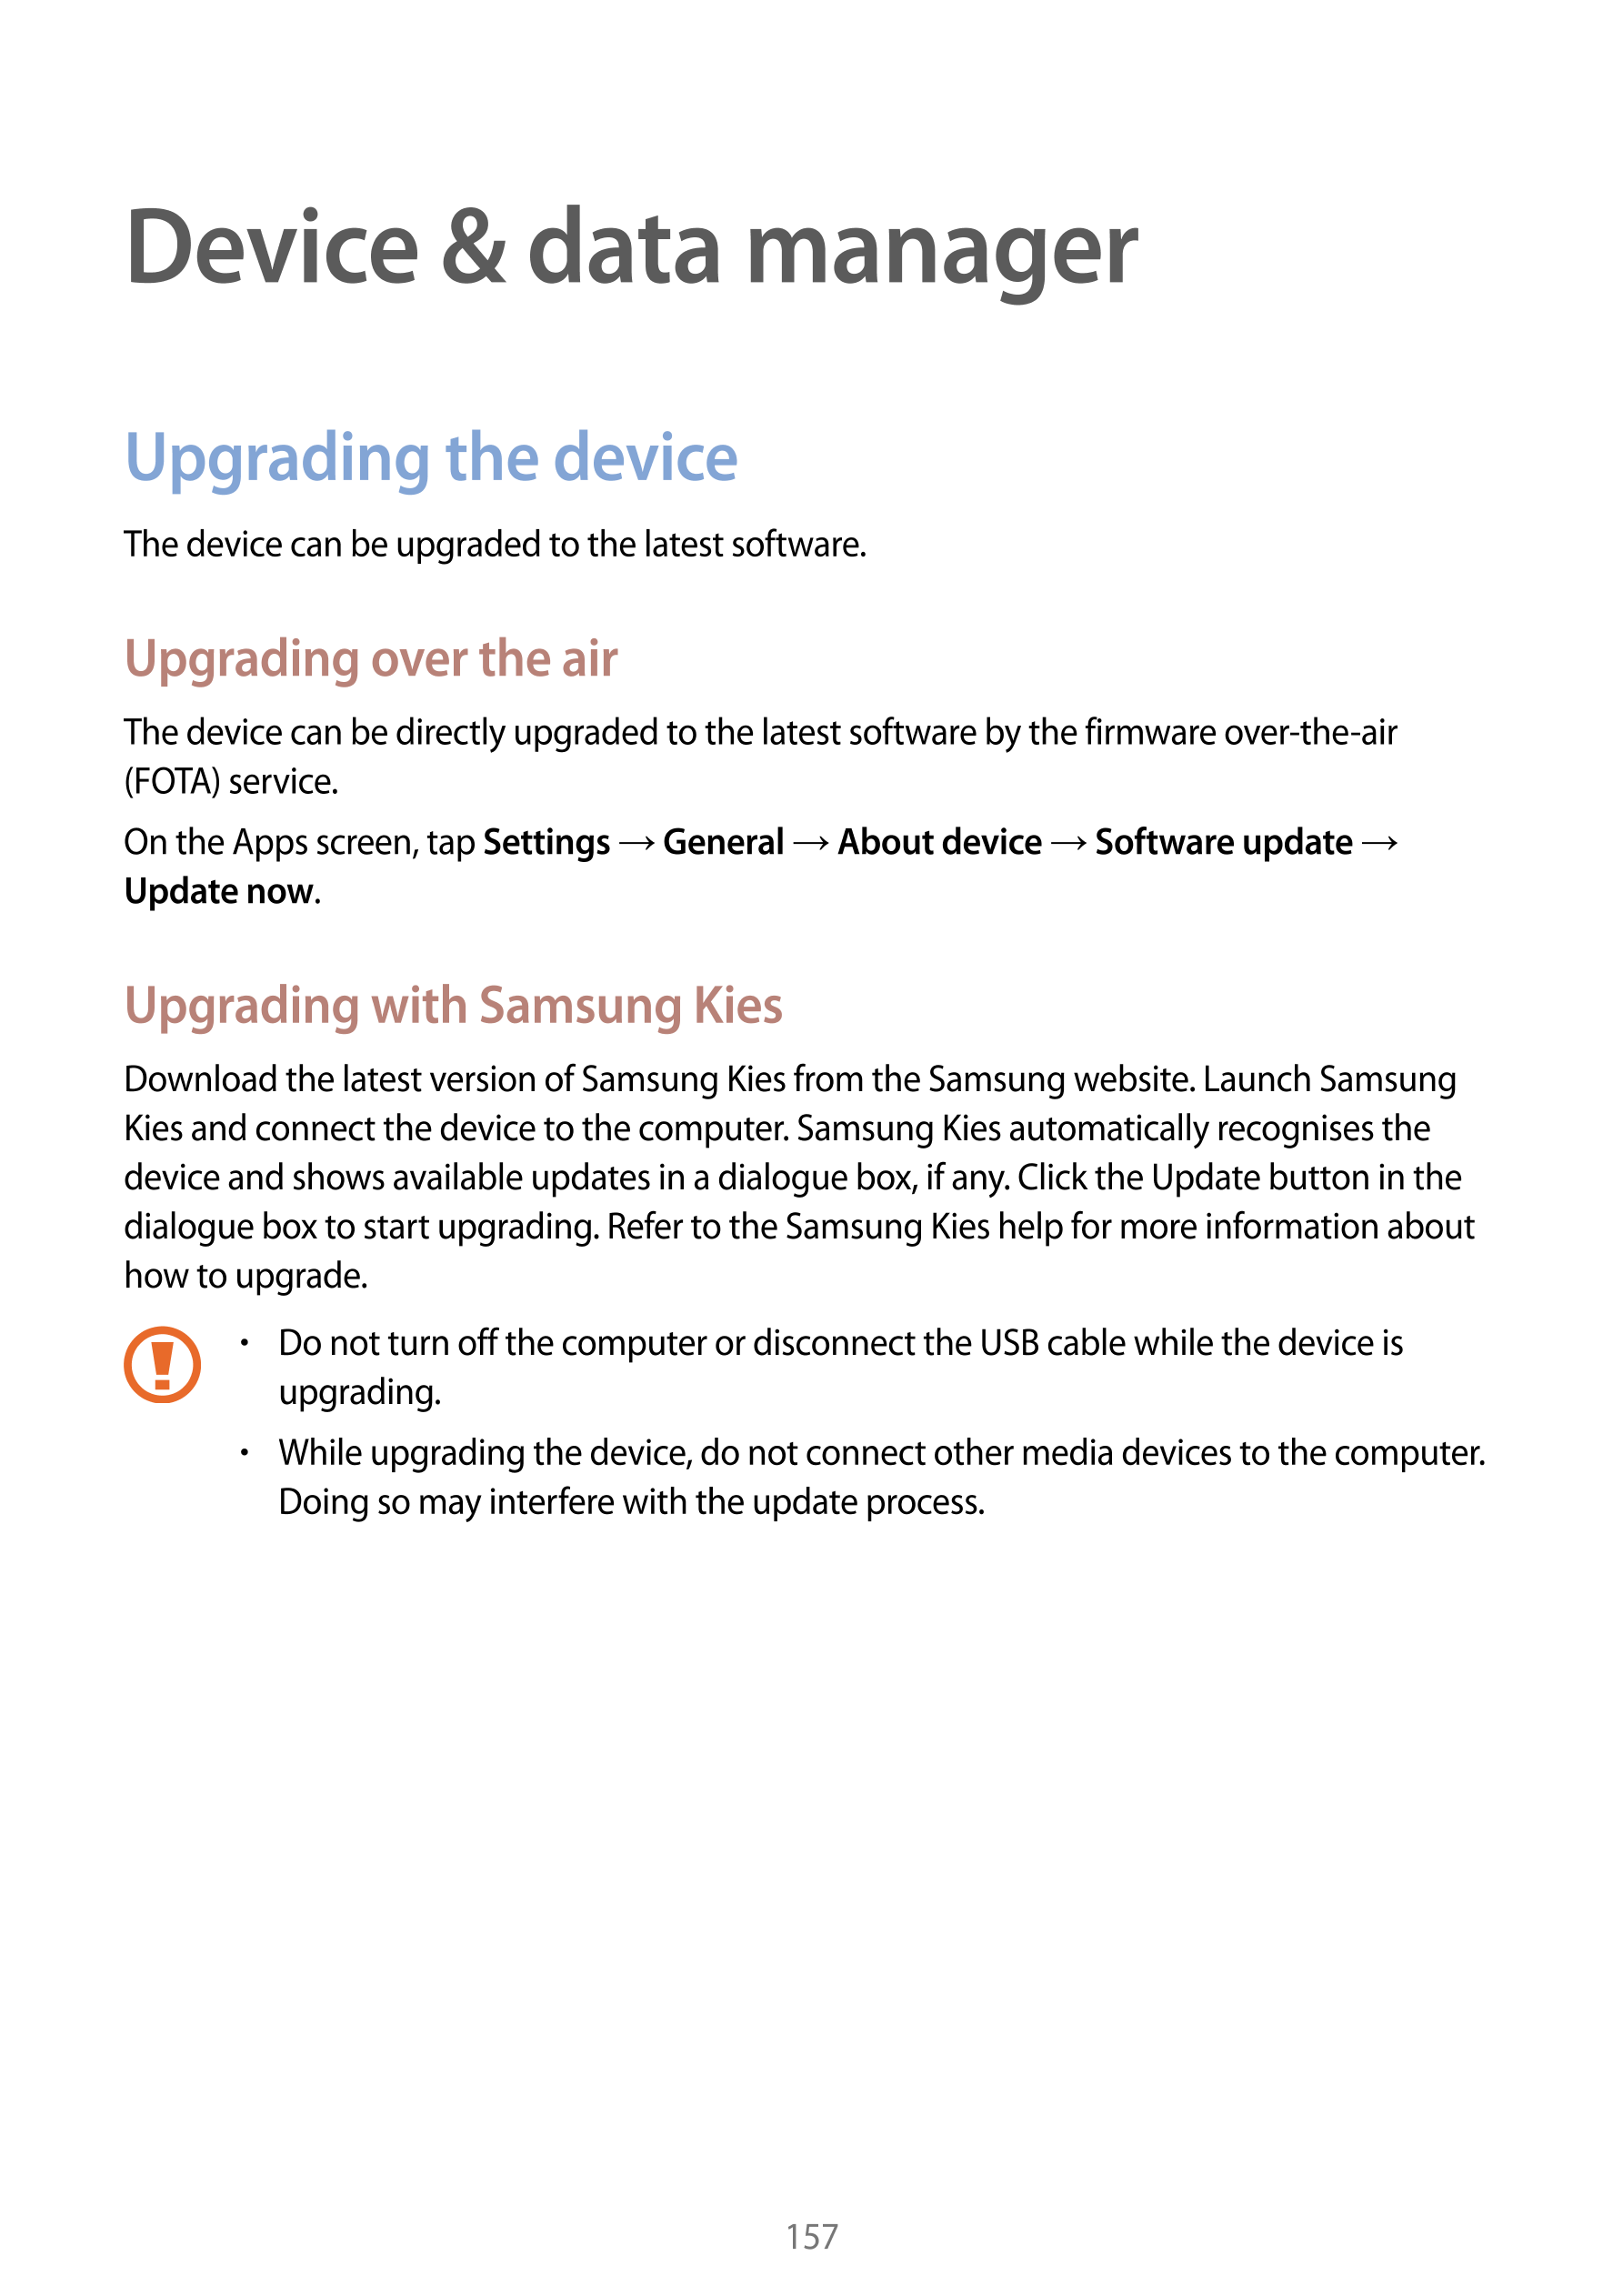 Device & data manager
Upgrading the device
The device can be upgraded to the latest software.
Upgrading over the air
The device 